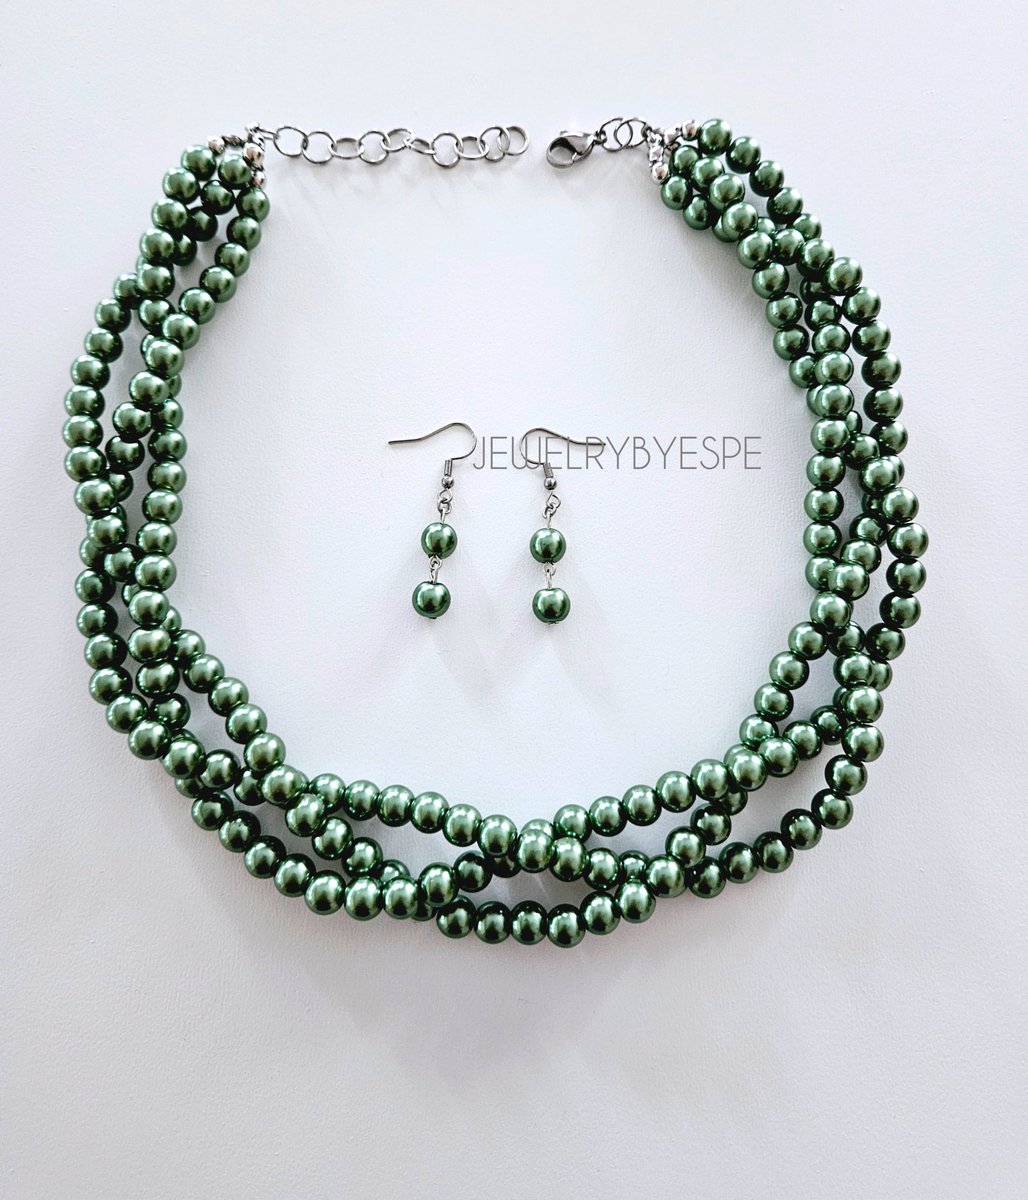 Olive Green Braided Pearl Necklace with Earrings 💚
FREESHIPPING 💌 
jewelrybyespe.etsy.com

##armygreen #fashionlover #outfitideas #springfashion #rusticwedding #mothersdaygift #Elegant #whattowear #boutique